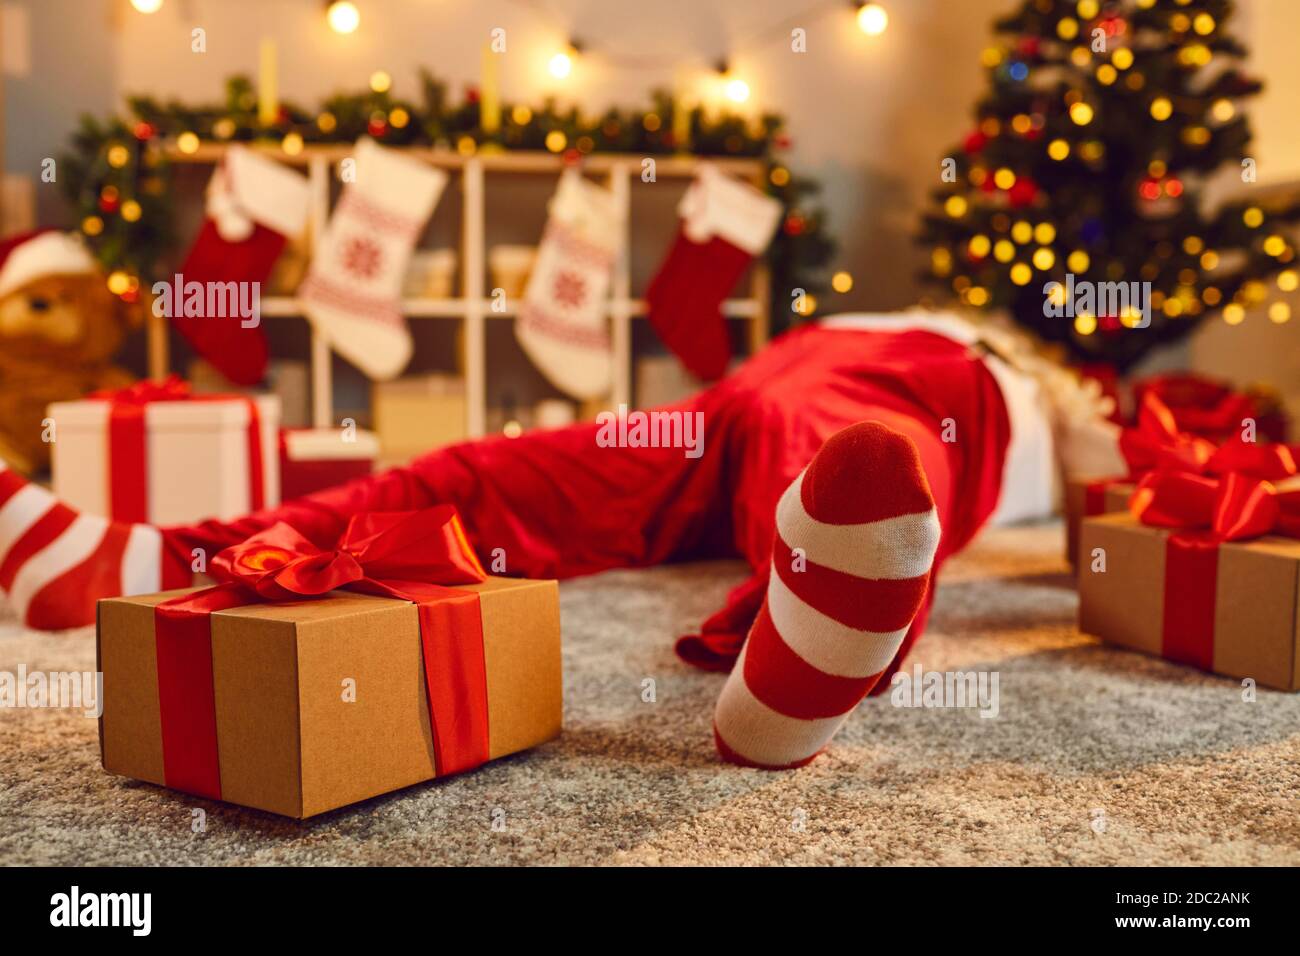 Gift box tied with red ribbon beside tired drunk Santa lying asleep on floor in living room Stock Photo